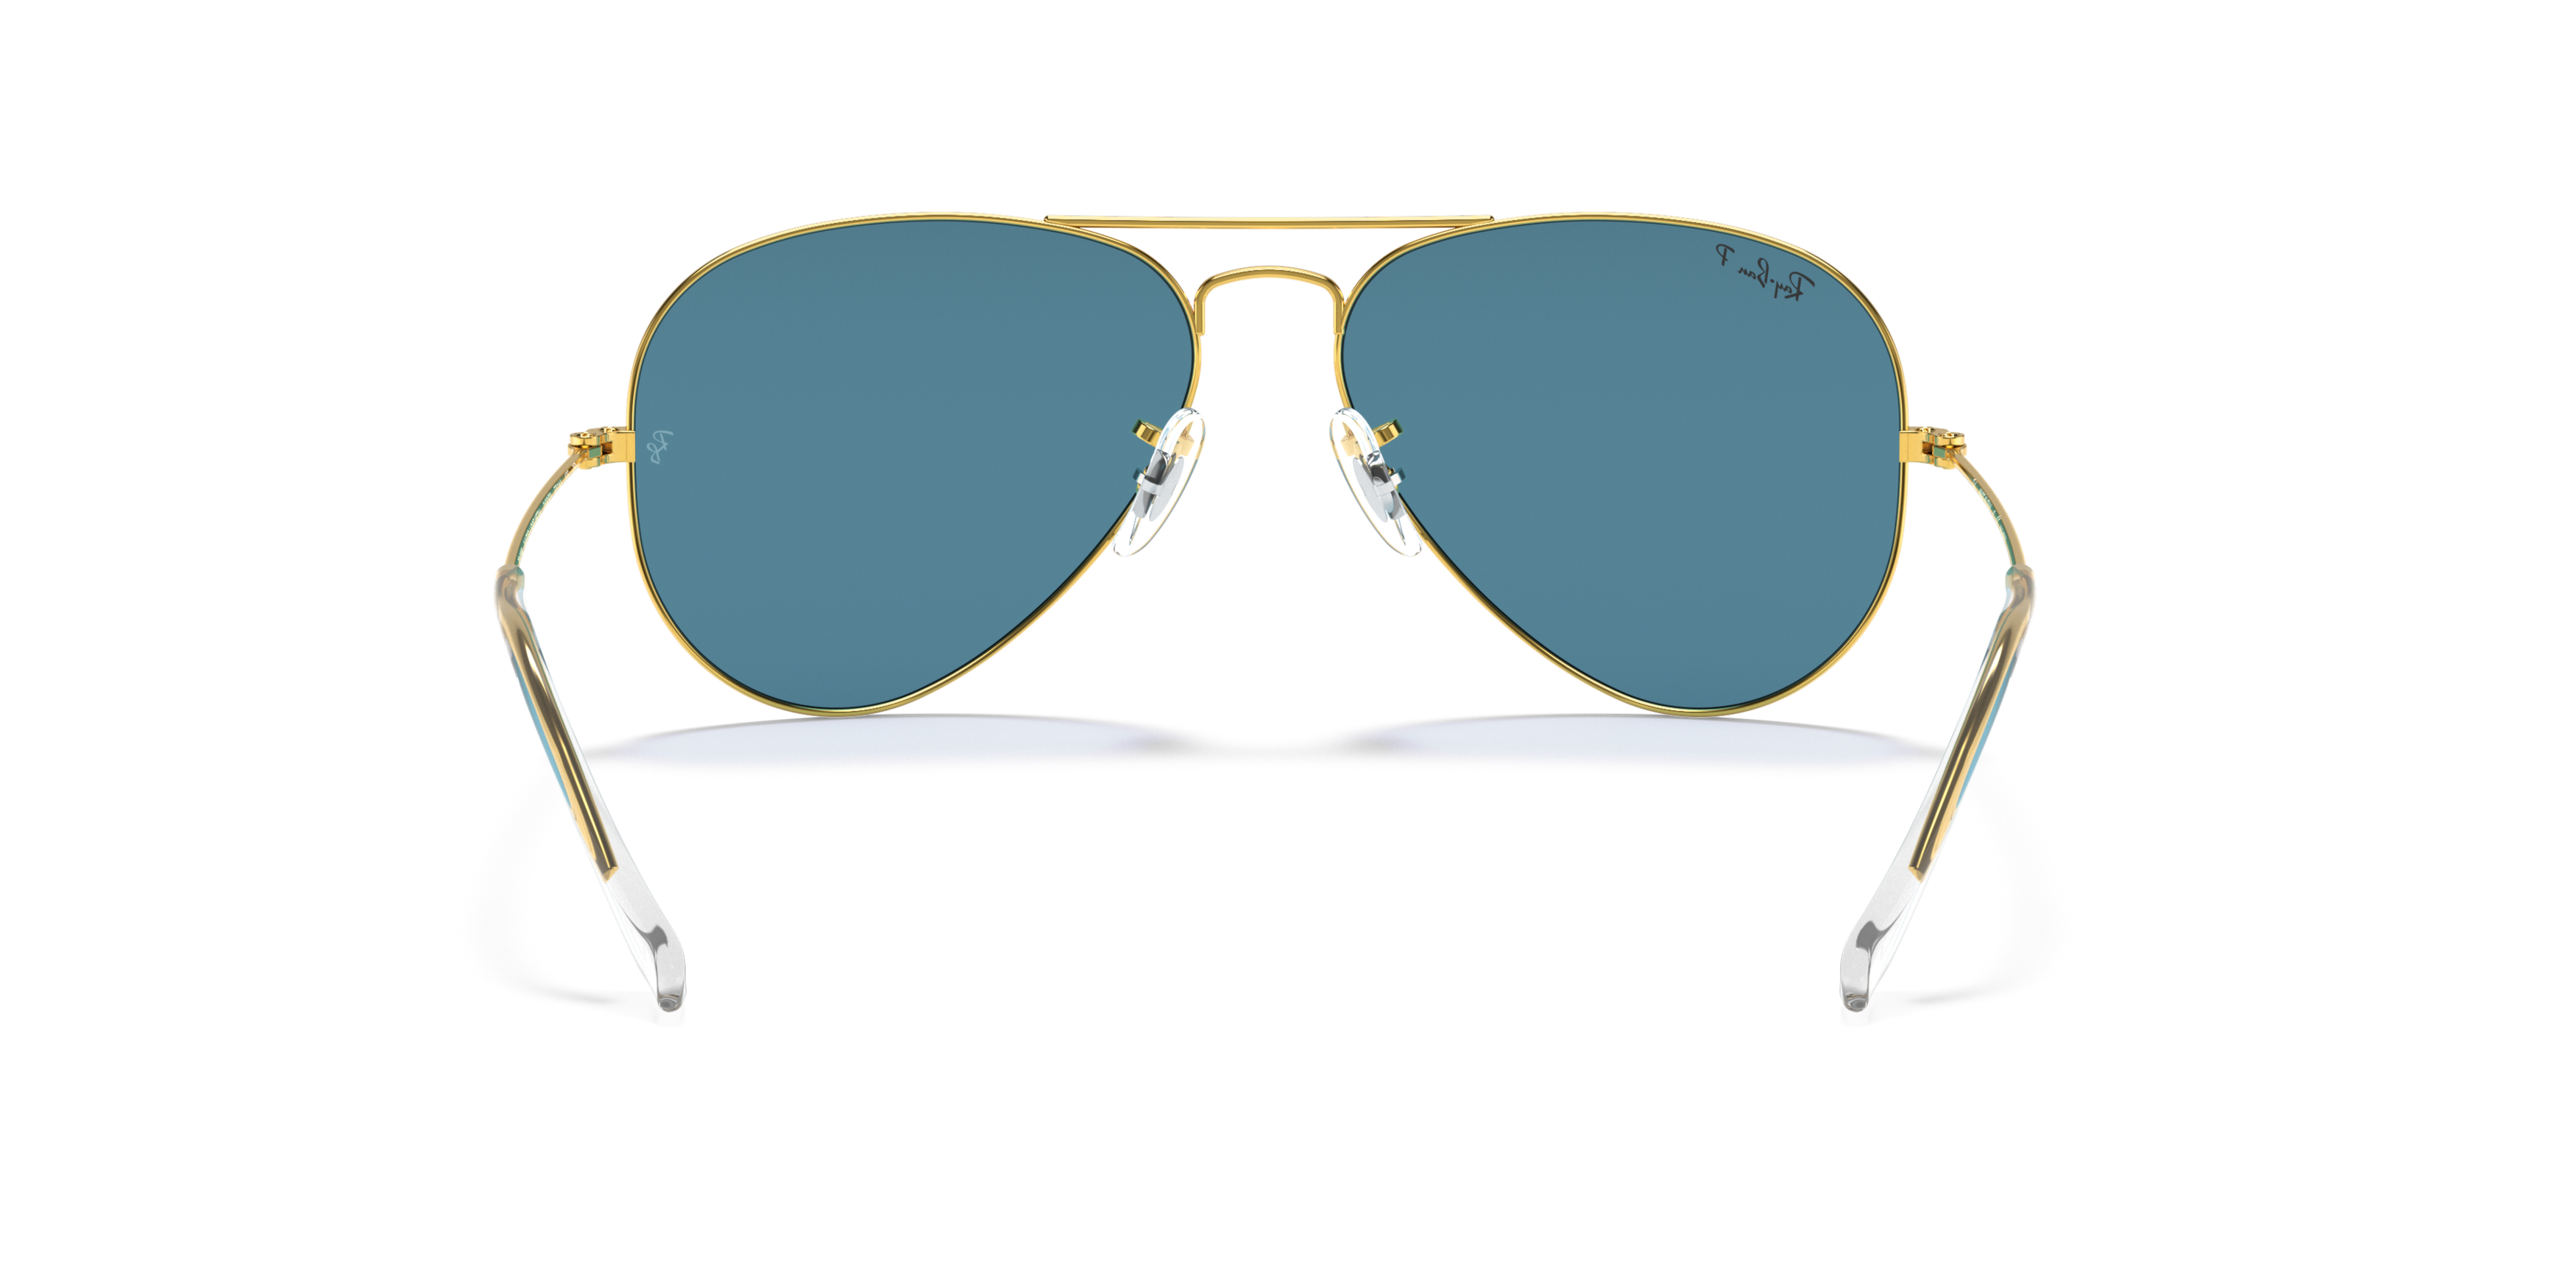 [products.image.detail02] Ray-Ban Aviator Classic RB3025 9196S2